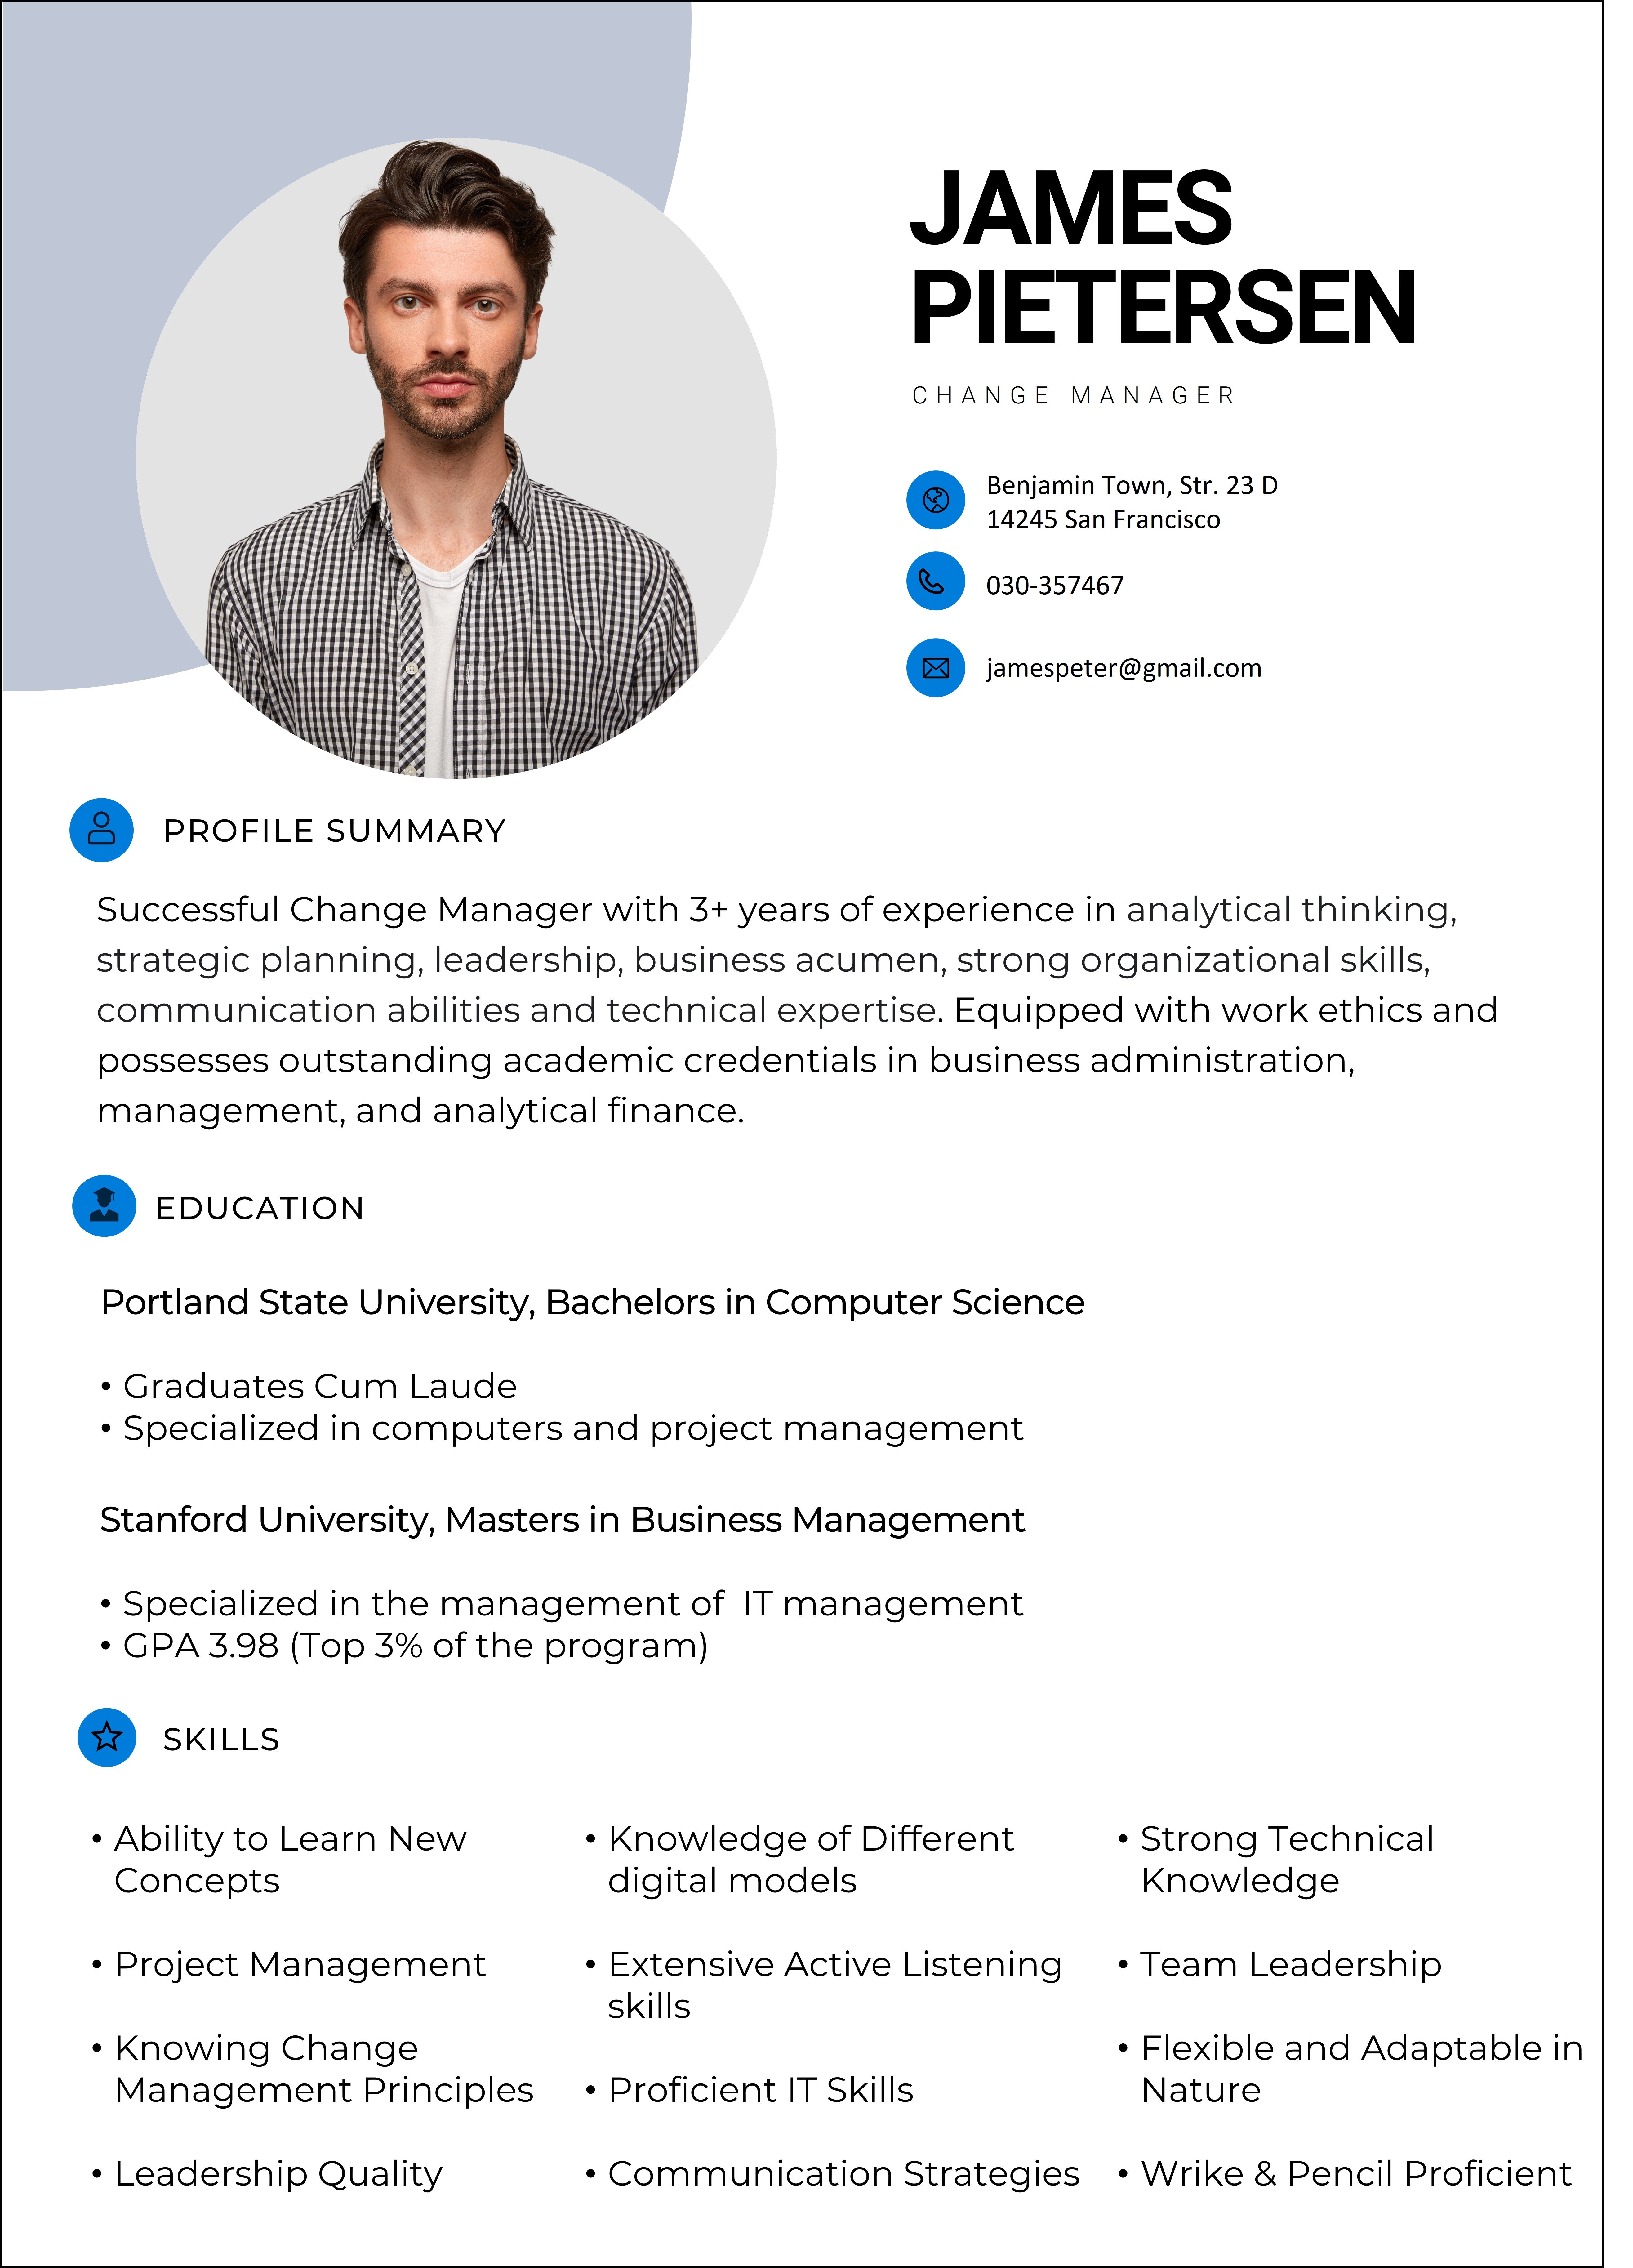 Change Manager Resume - Change Manager Resume - Invensis Learning